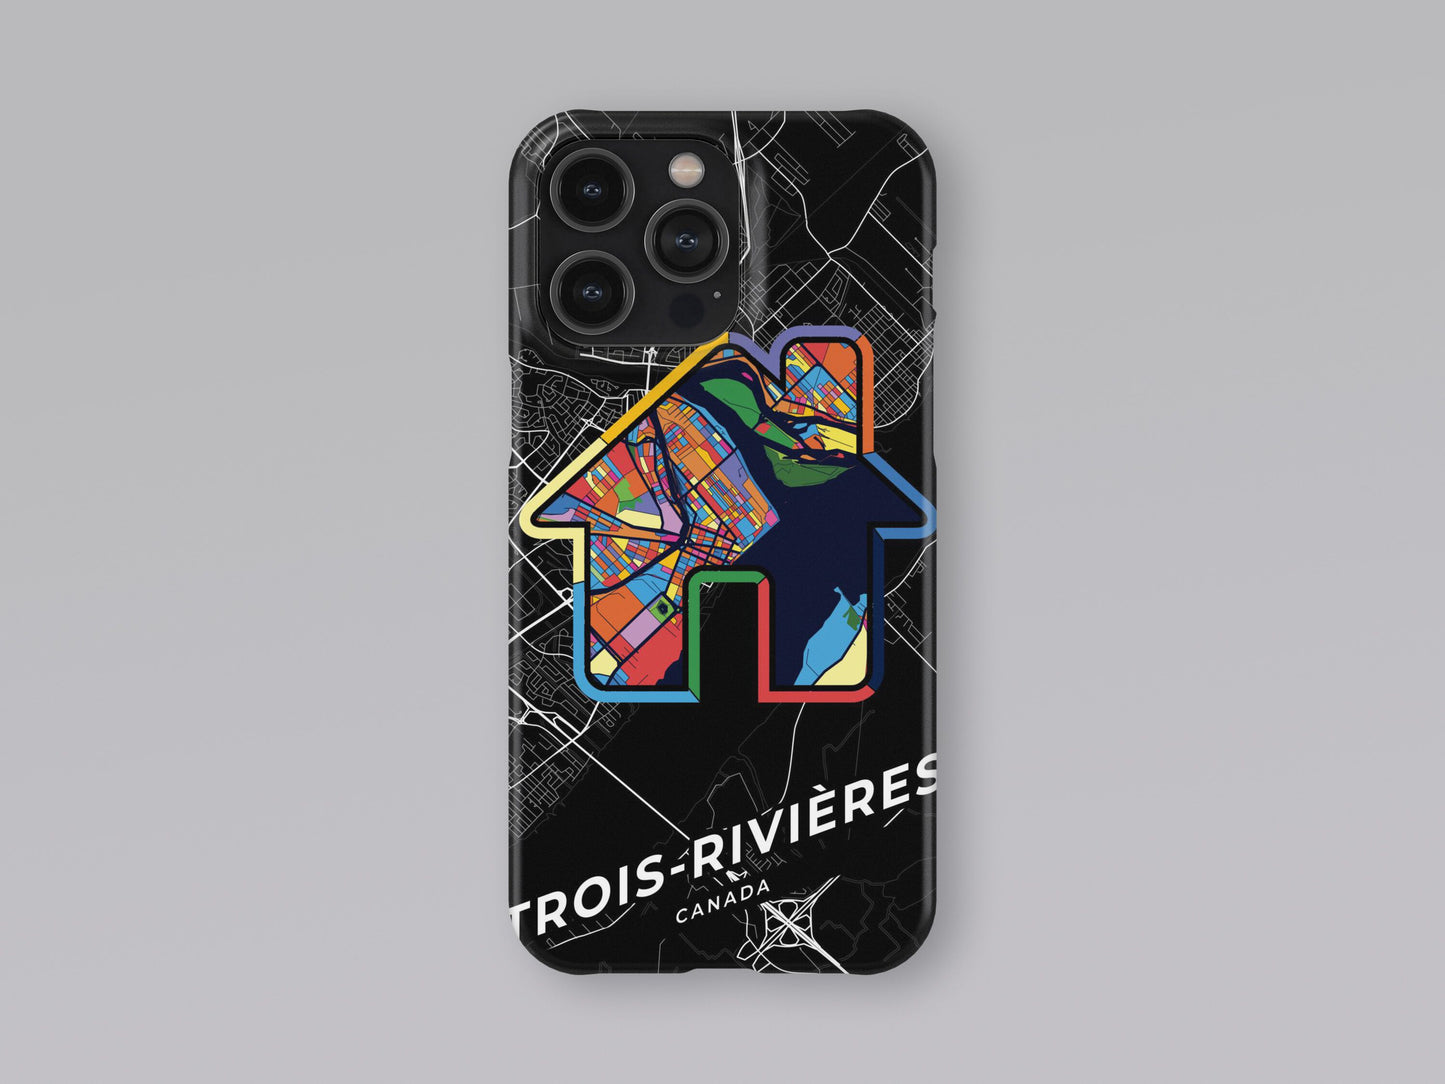 Trois-Rivières Canada slim phone case with colorful icon 3